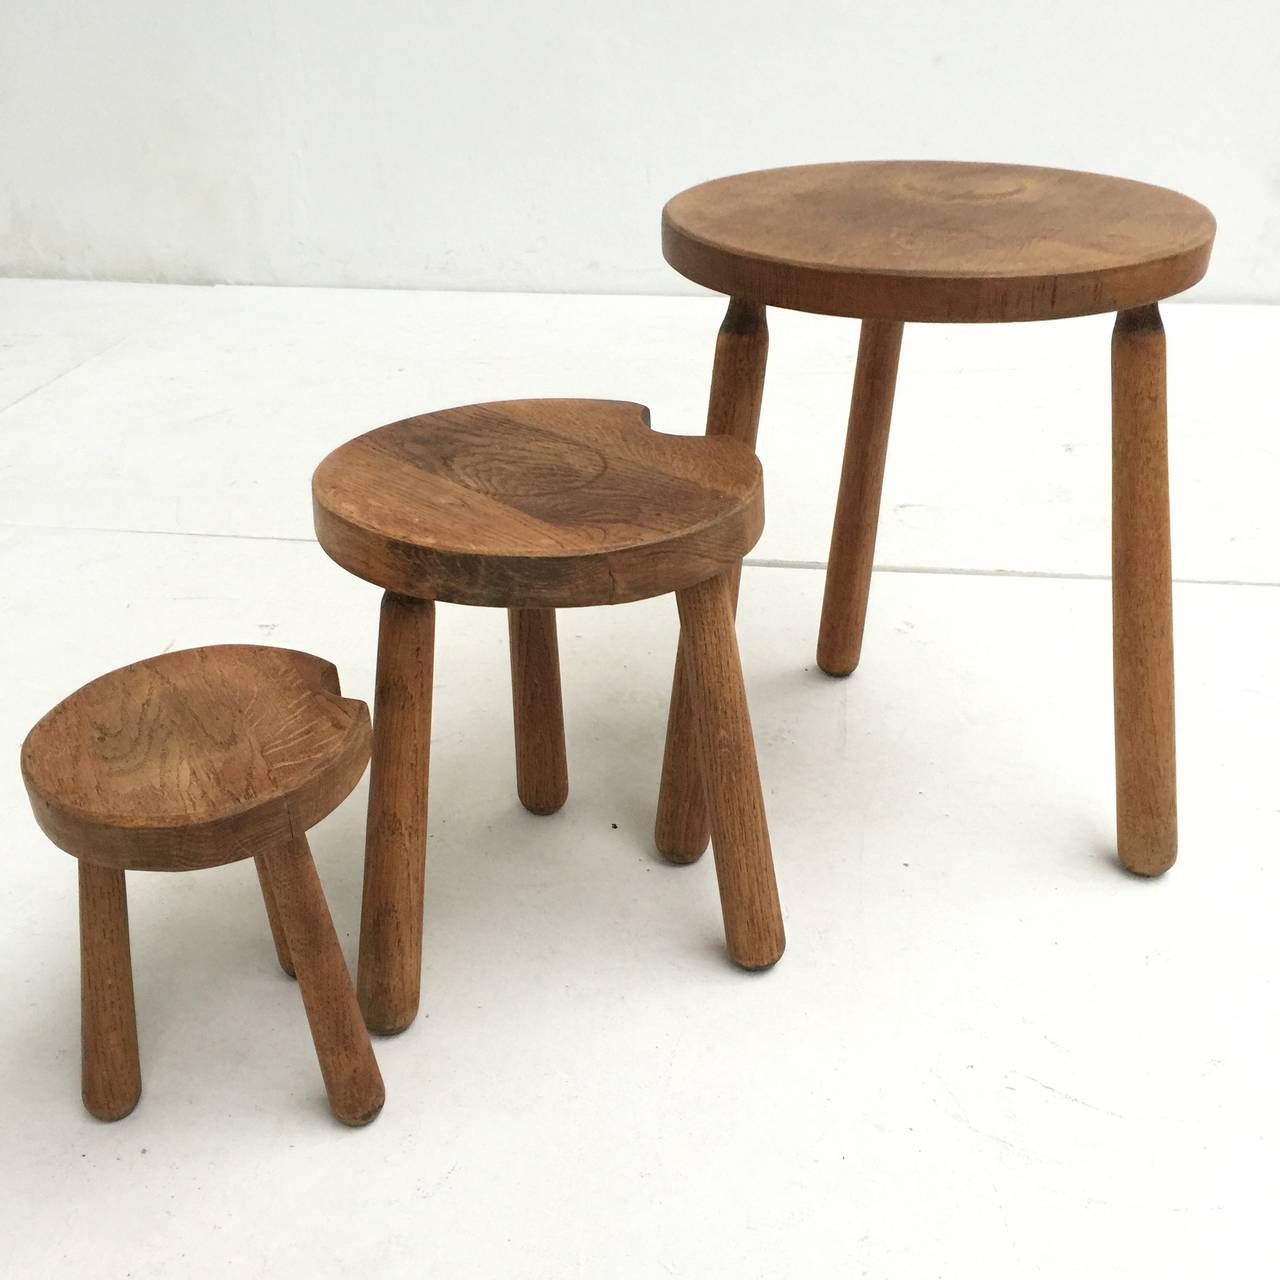 A lovely set of rustic oak nesting tables in the Alpine style of Charlotte Perriand

They 2 smaller tables have a cutout in the top so you can compose them in many nice compositions as shown in pictures

The size listed is that of the largest